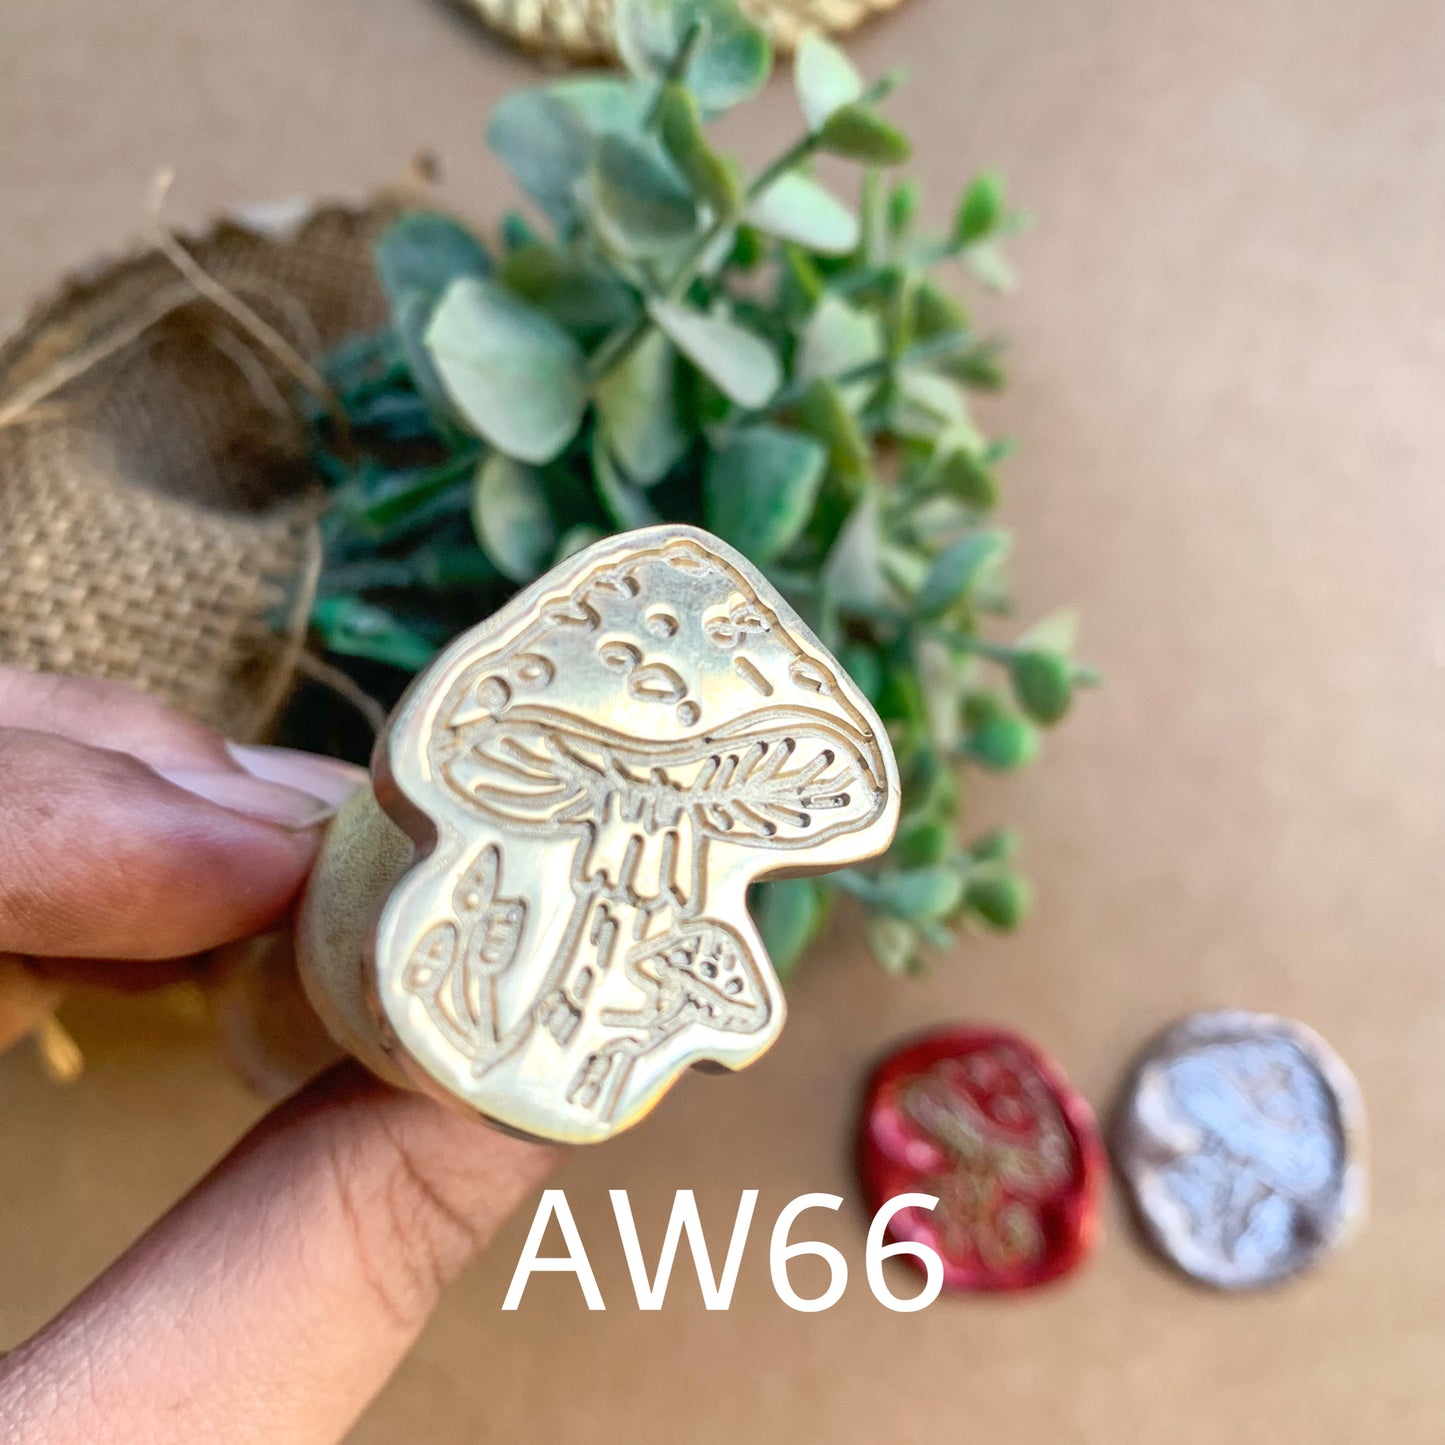 AW66 - Premium Seal Wax Stamp with Wooden Handle | 30mm Diameter